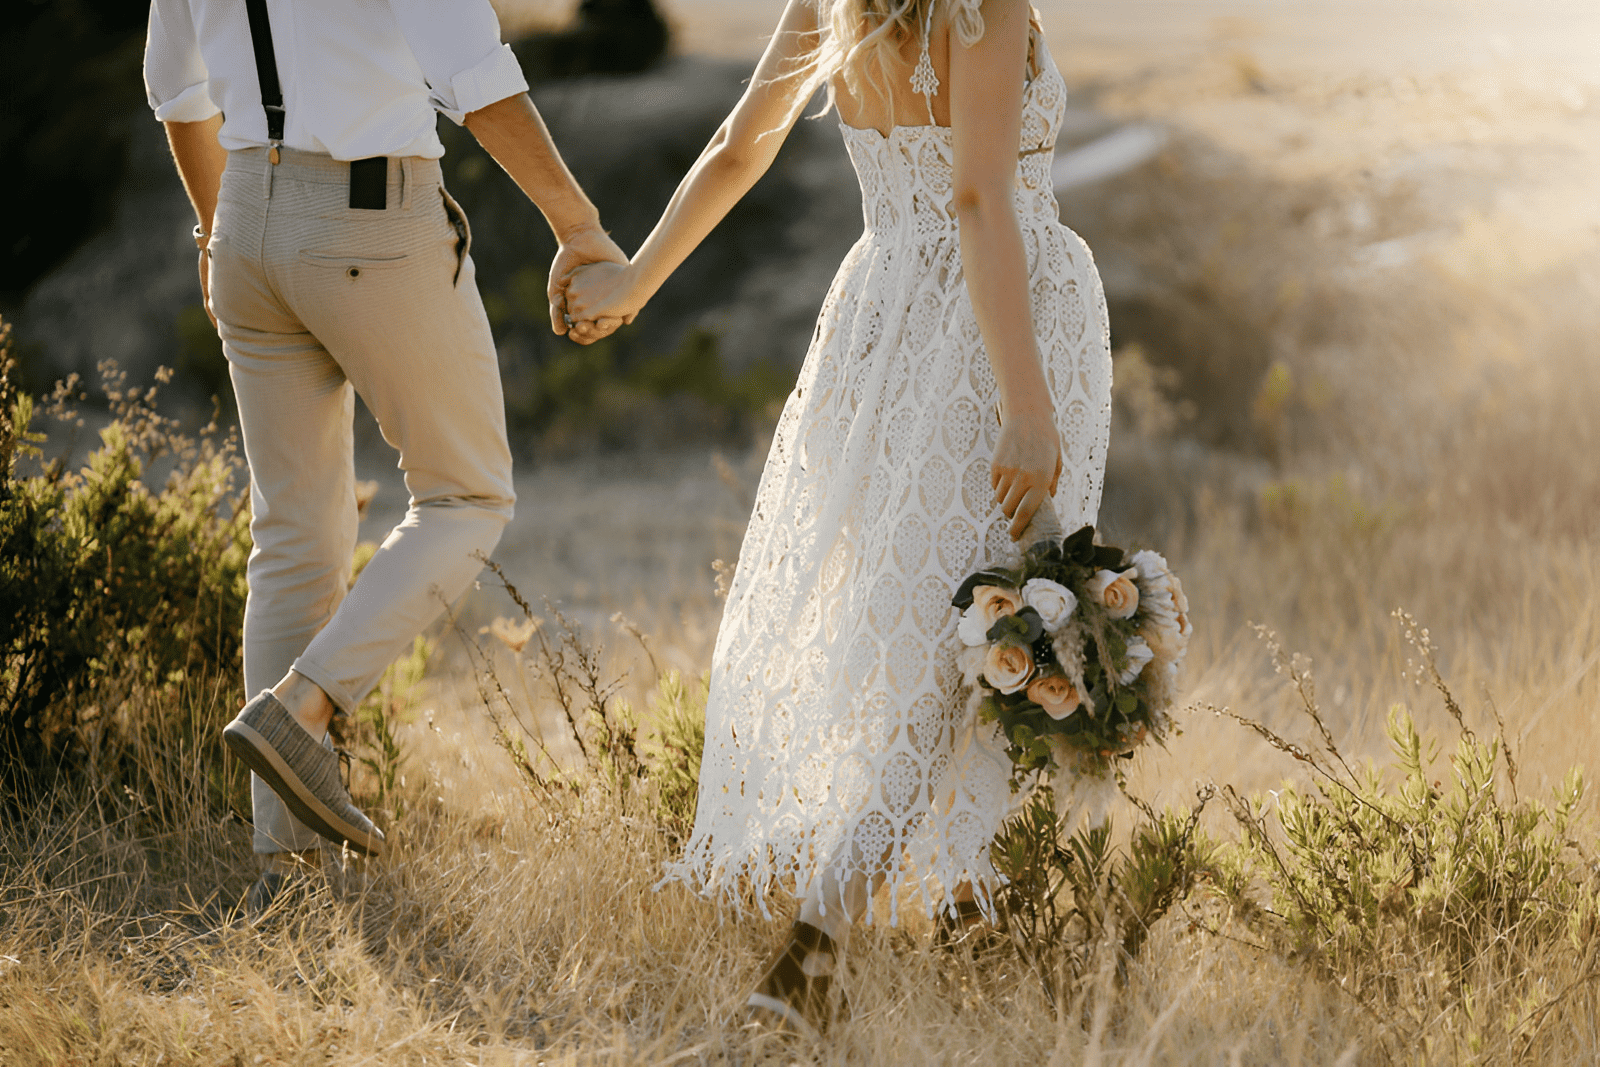 A bride and groom holding hands while walking through a field